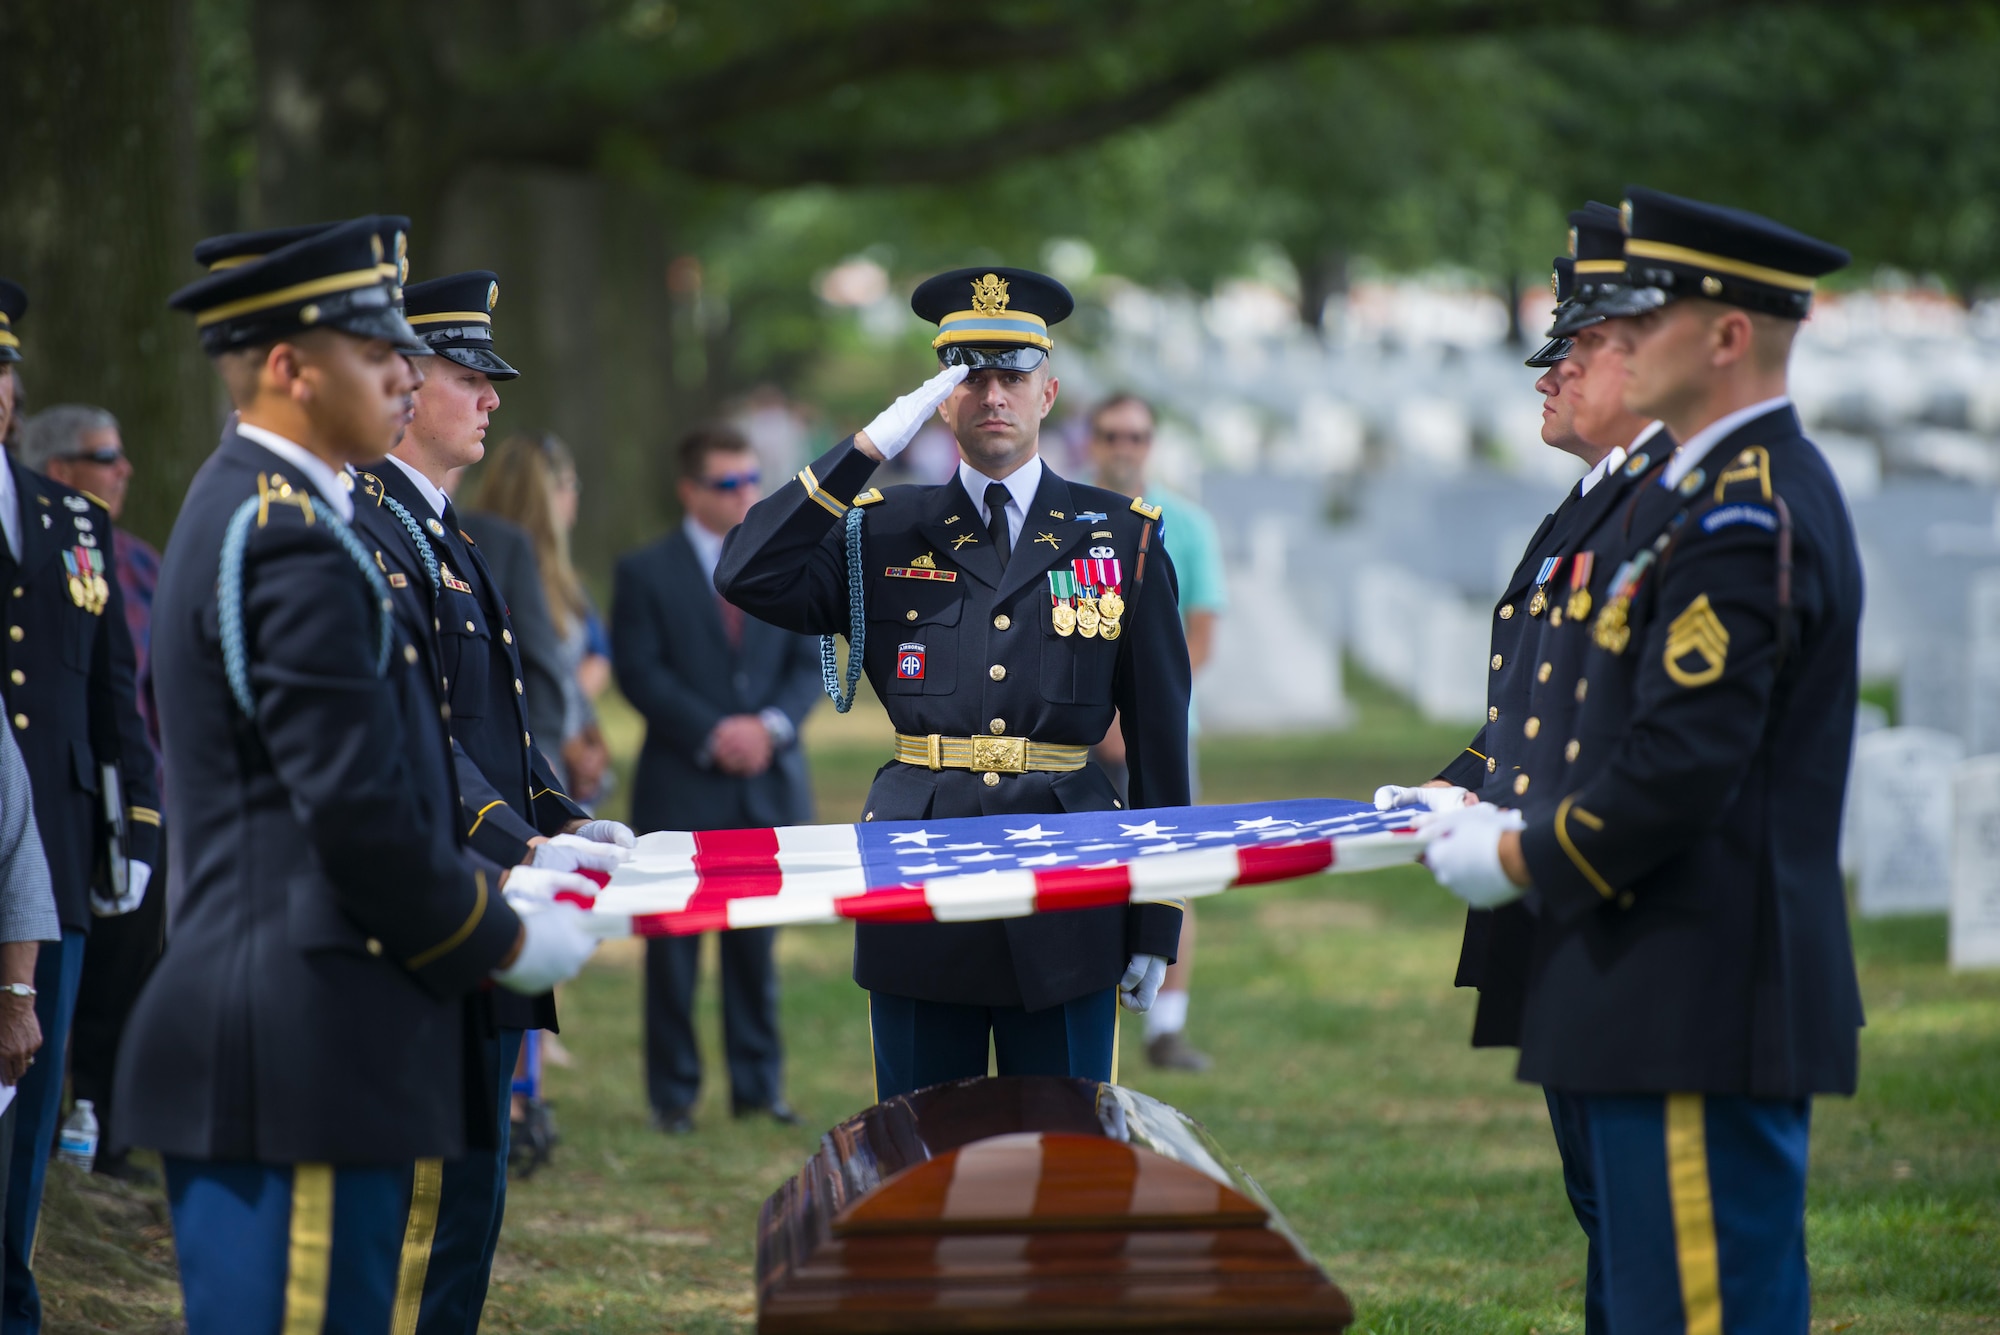 Members of the 3d U.S. Infantry Regiment (The Old Guard) participate in the full honors service for Army Air Forces 1st. Lt. Francis Pitonyak at Arlington National Cemetery, Arlington, Va., Sept. 22, 2017. Pitonyak, a member of the 36th Fighter Group, 8th Fighter Squadron during WWII, went missing in October 1943 during deteriorating weather conditions and lost visibility near Port Moresby, Territory of Papua. His remains were identified by a Defense POW/MIA Accounting Agency recovery team in July 2016 from dental remains recovered from a crash site in Papua New Guinea. (U.S. Army photo by Elizabeth Fraser)